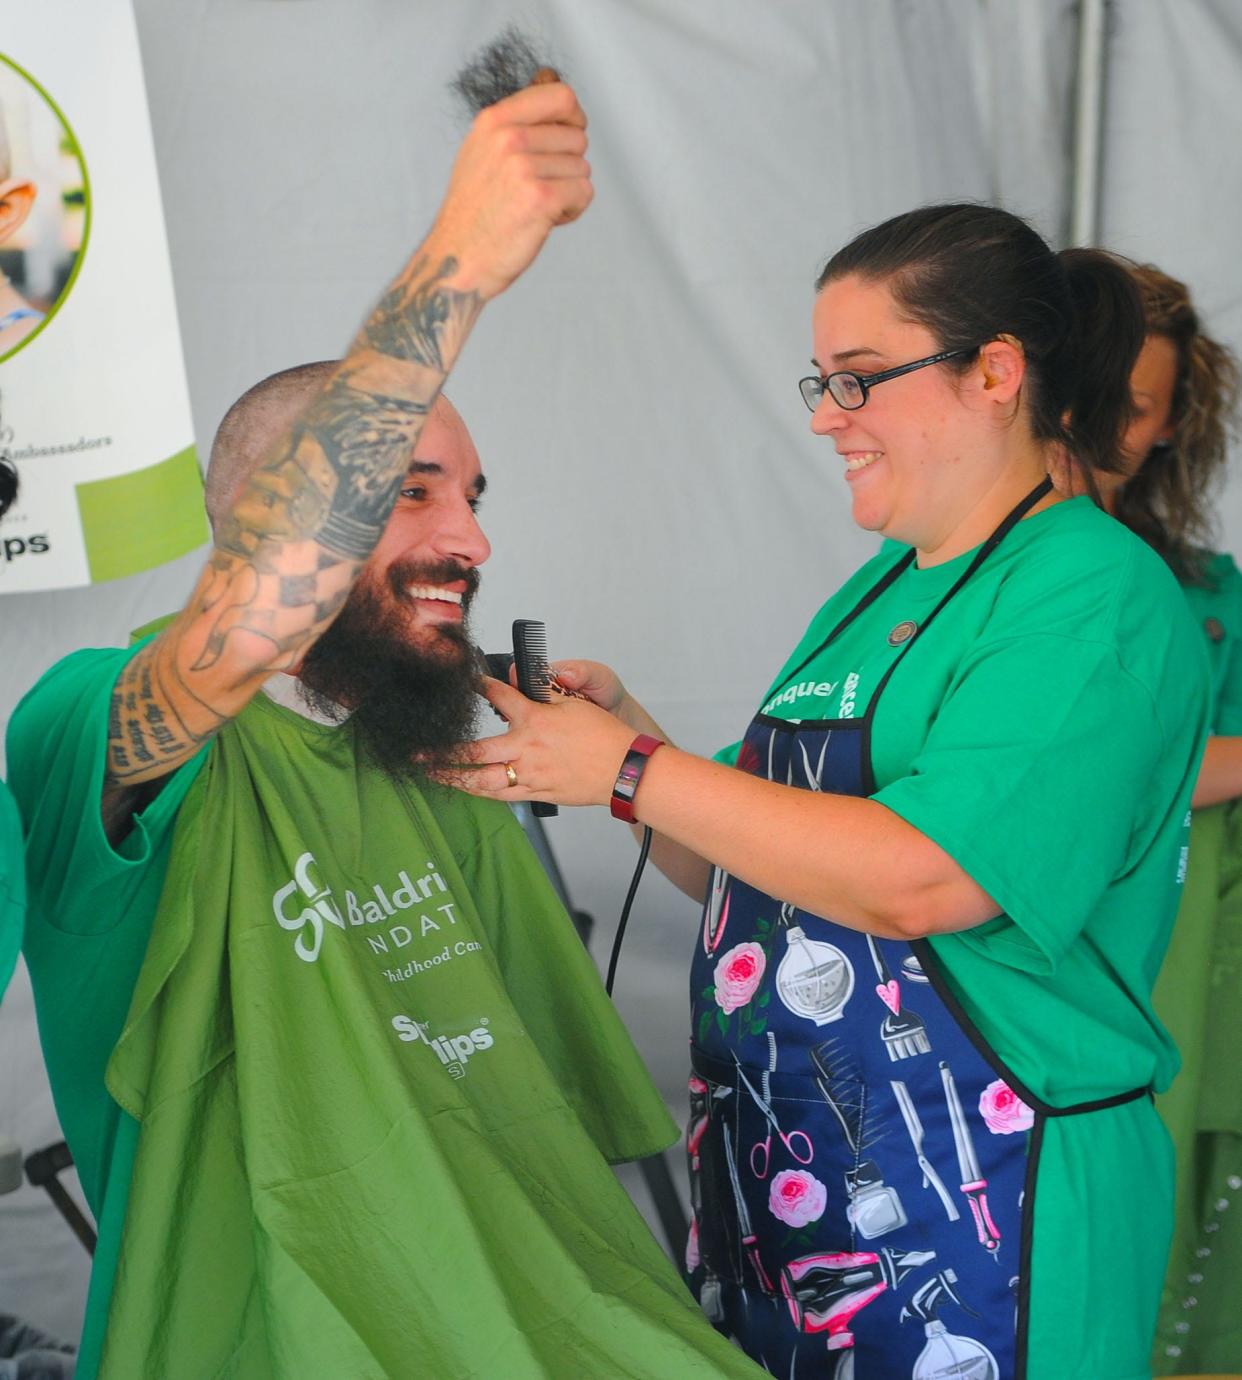 Charlie Miller holds up hair from his beard, which had been growing for two years as stylist Amy Miller proceeds to remove the remainder of it Sunday, Sept. 18, 2022, during the 7th annual Alliance St. Baldricks fundraiser. Miller raised more than $1,100 in donations for cancer research.